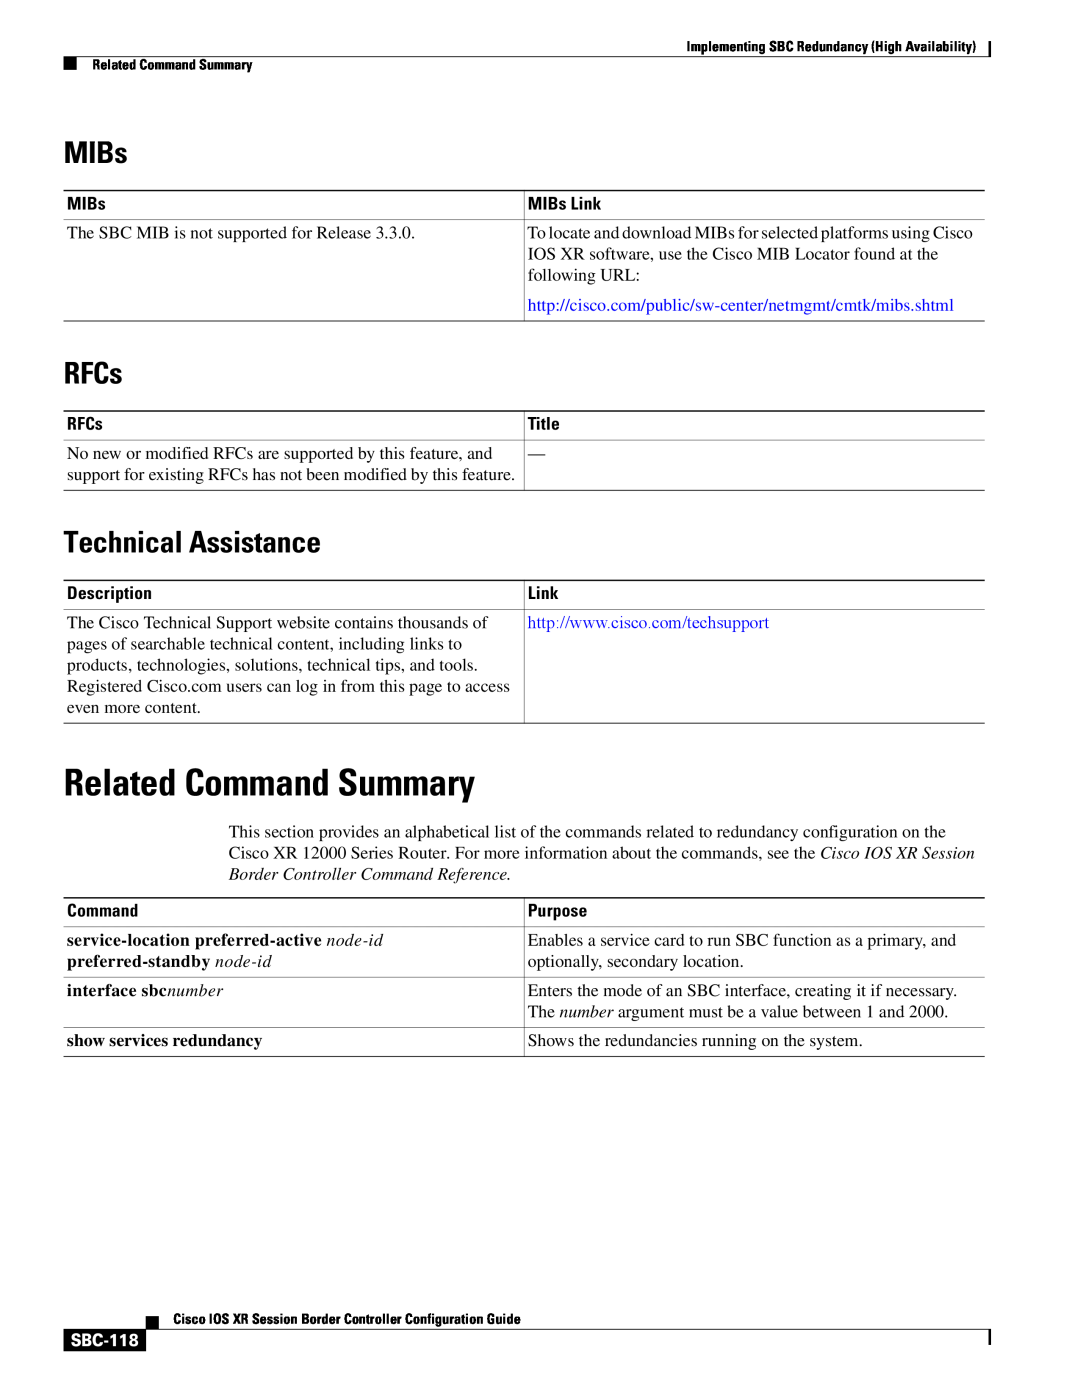 Cisco Systems SBC-111 Related Command Summary, RFCs, Technical Assistance, MIBs Link, Description, SBC-118, Title 